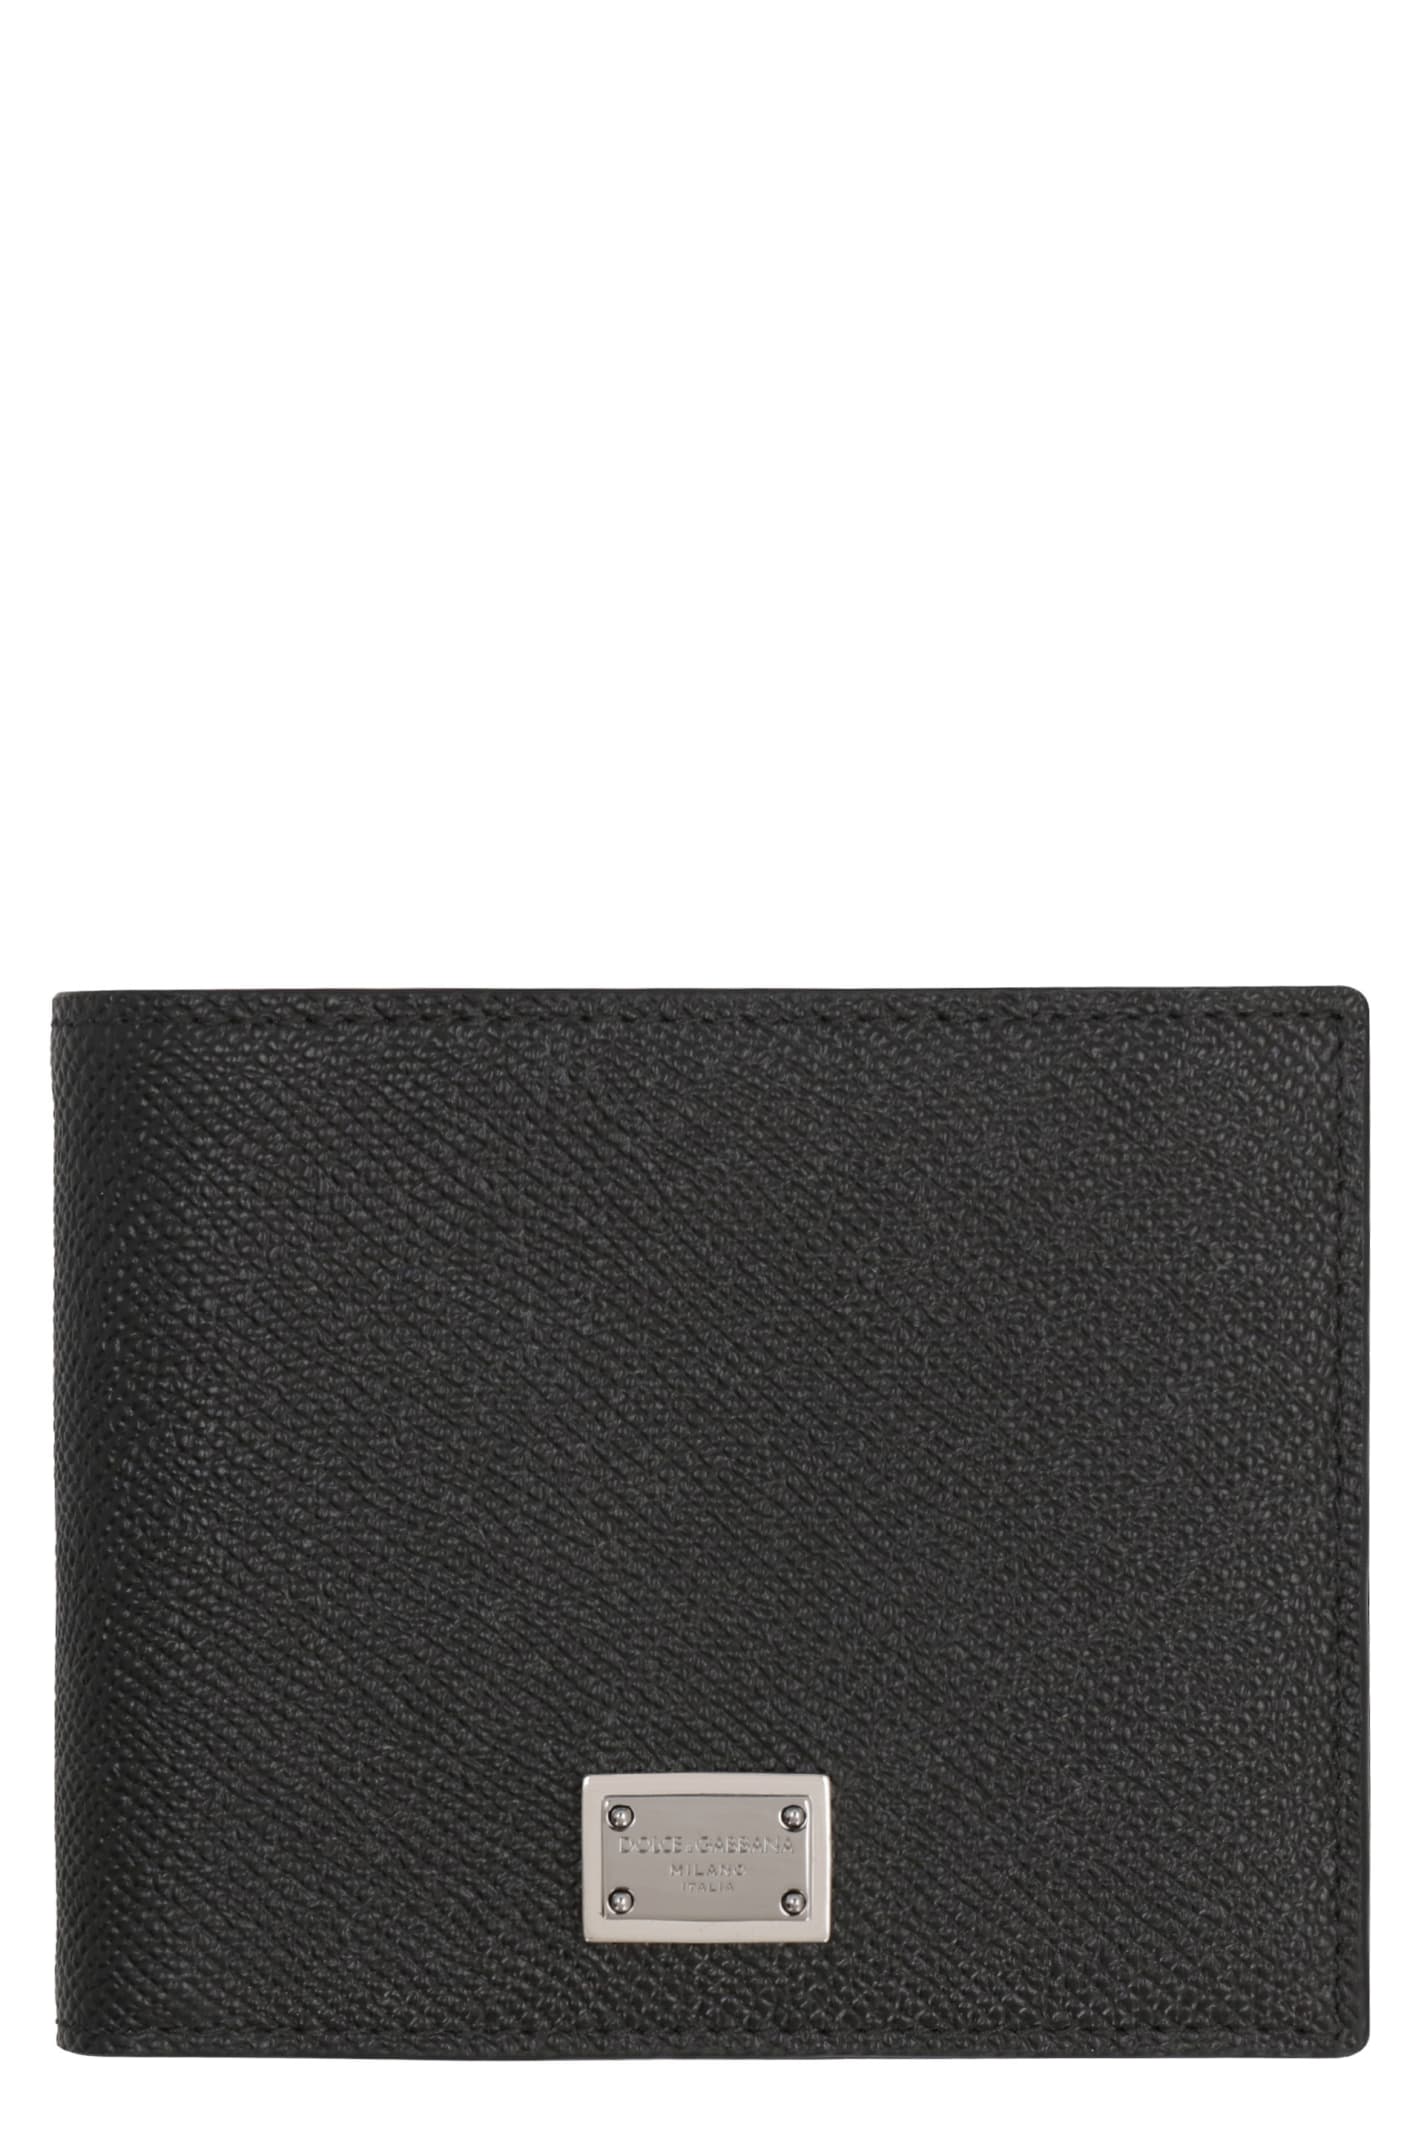 Dolce & Gabbana Leather Flap-over Wallet In Nero